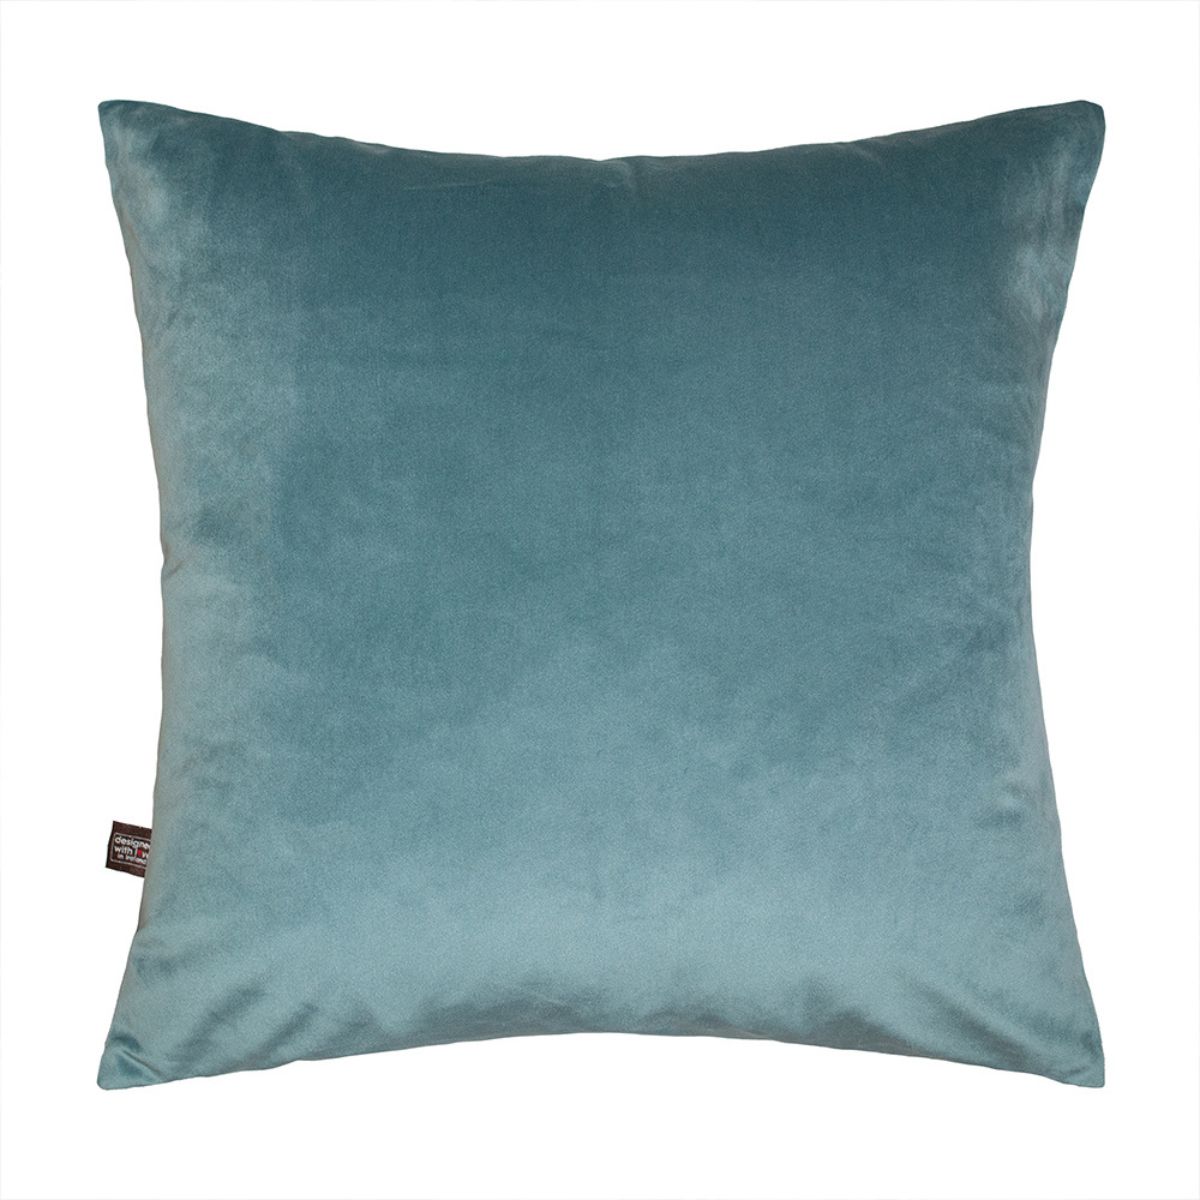 Borneo Pink and Teal Cushion - 3